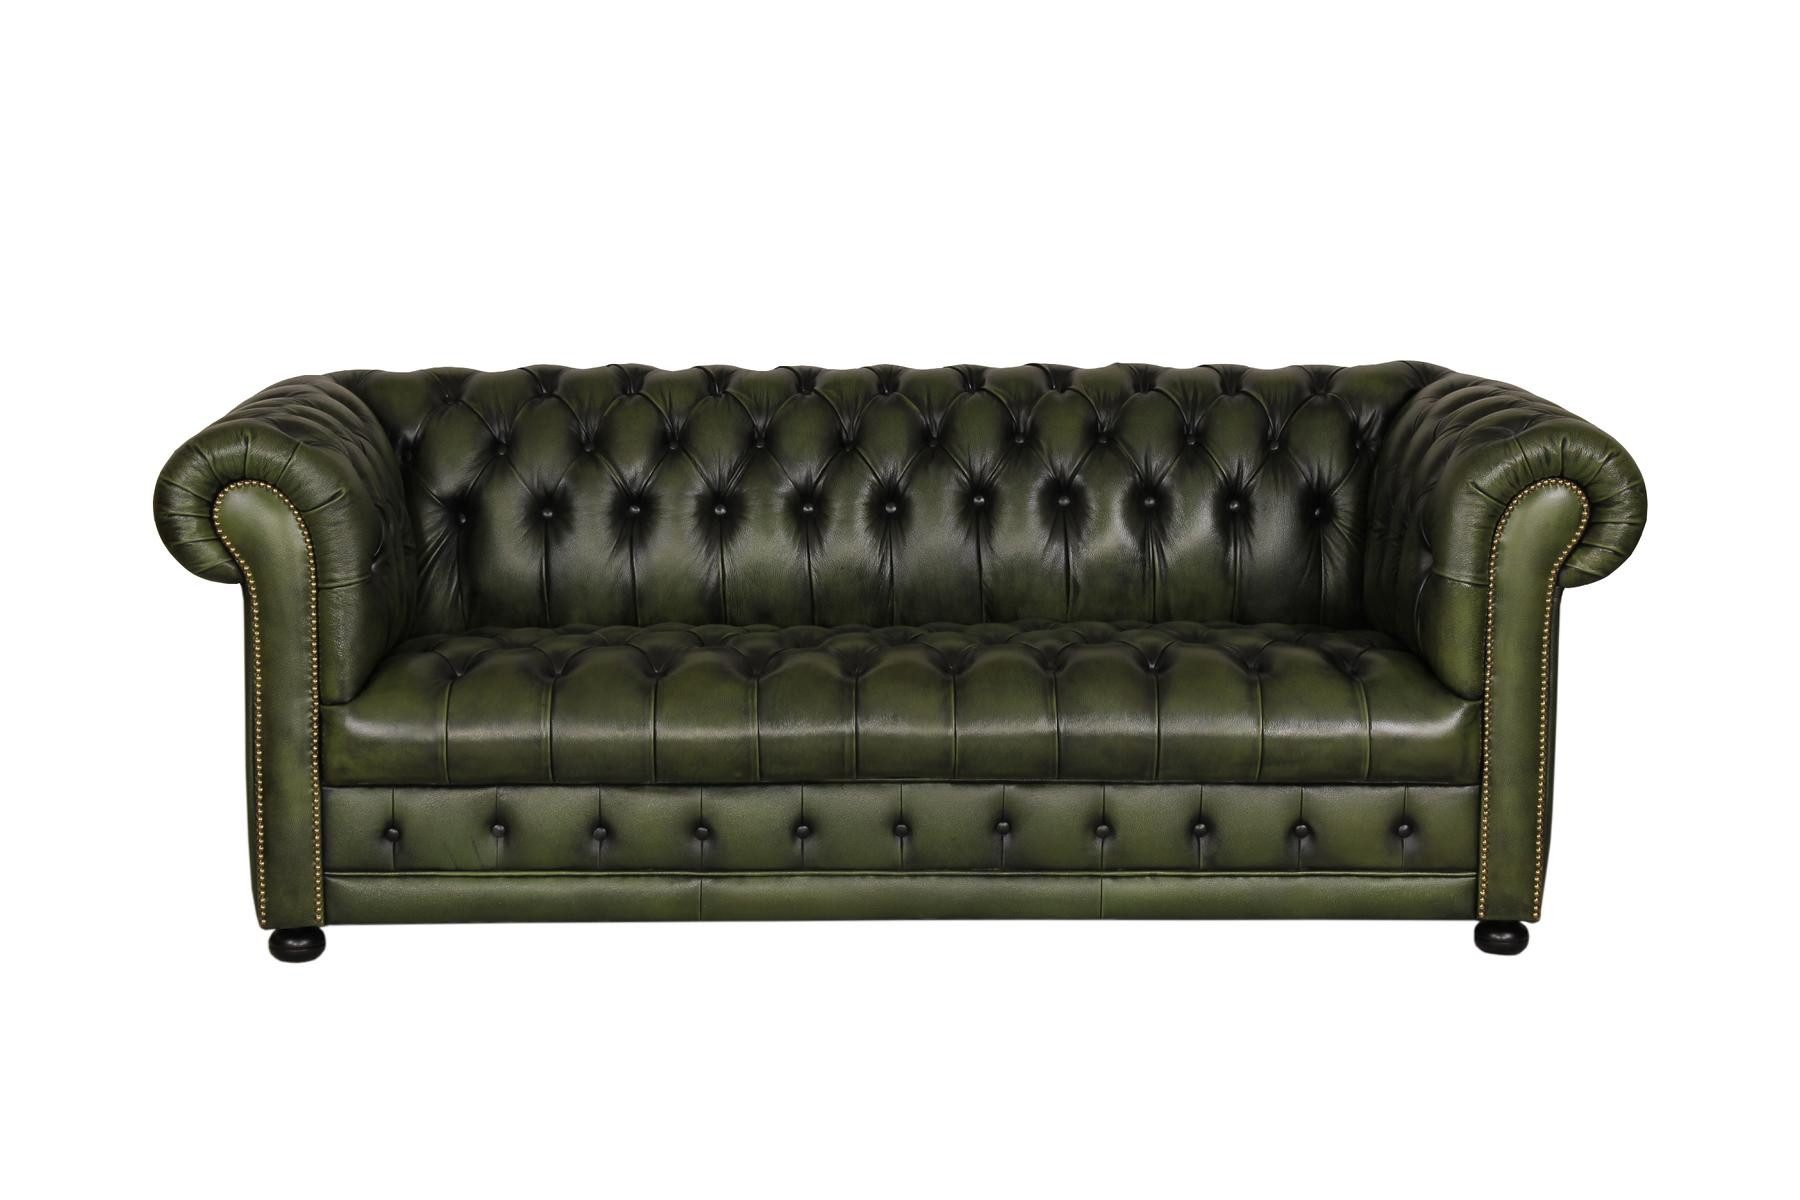 Salottini Chesterfield-Sofa XL 3er Sofa Chesterfield 3-Sitzer Couch Clyde Deluxe, Vollleder